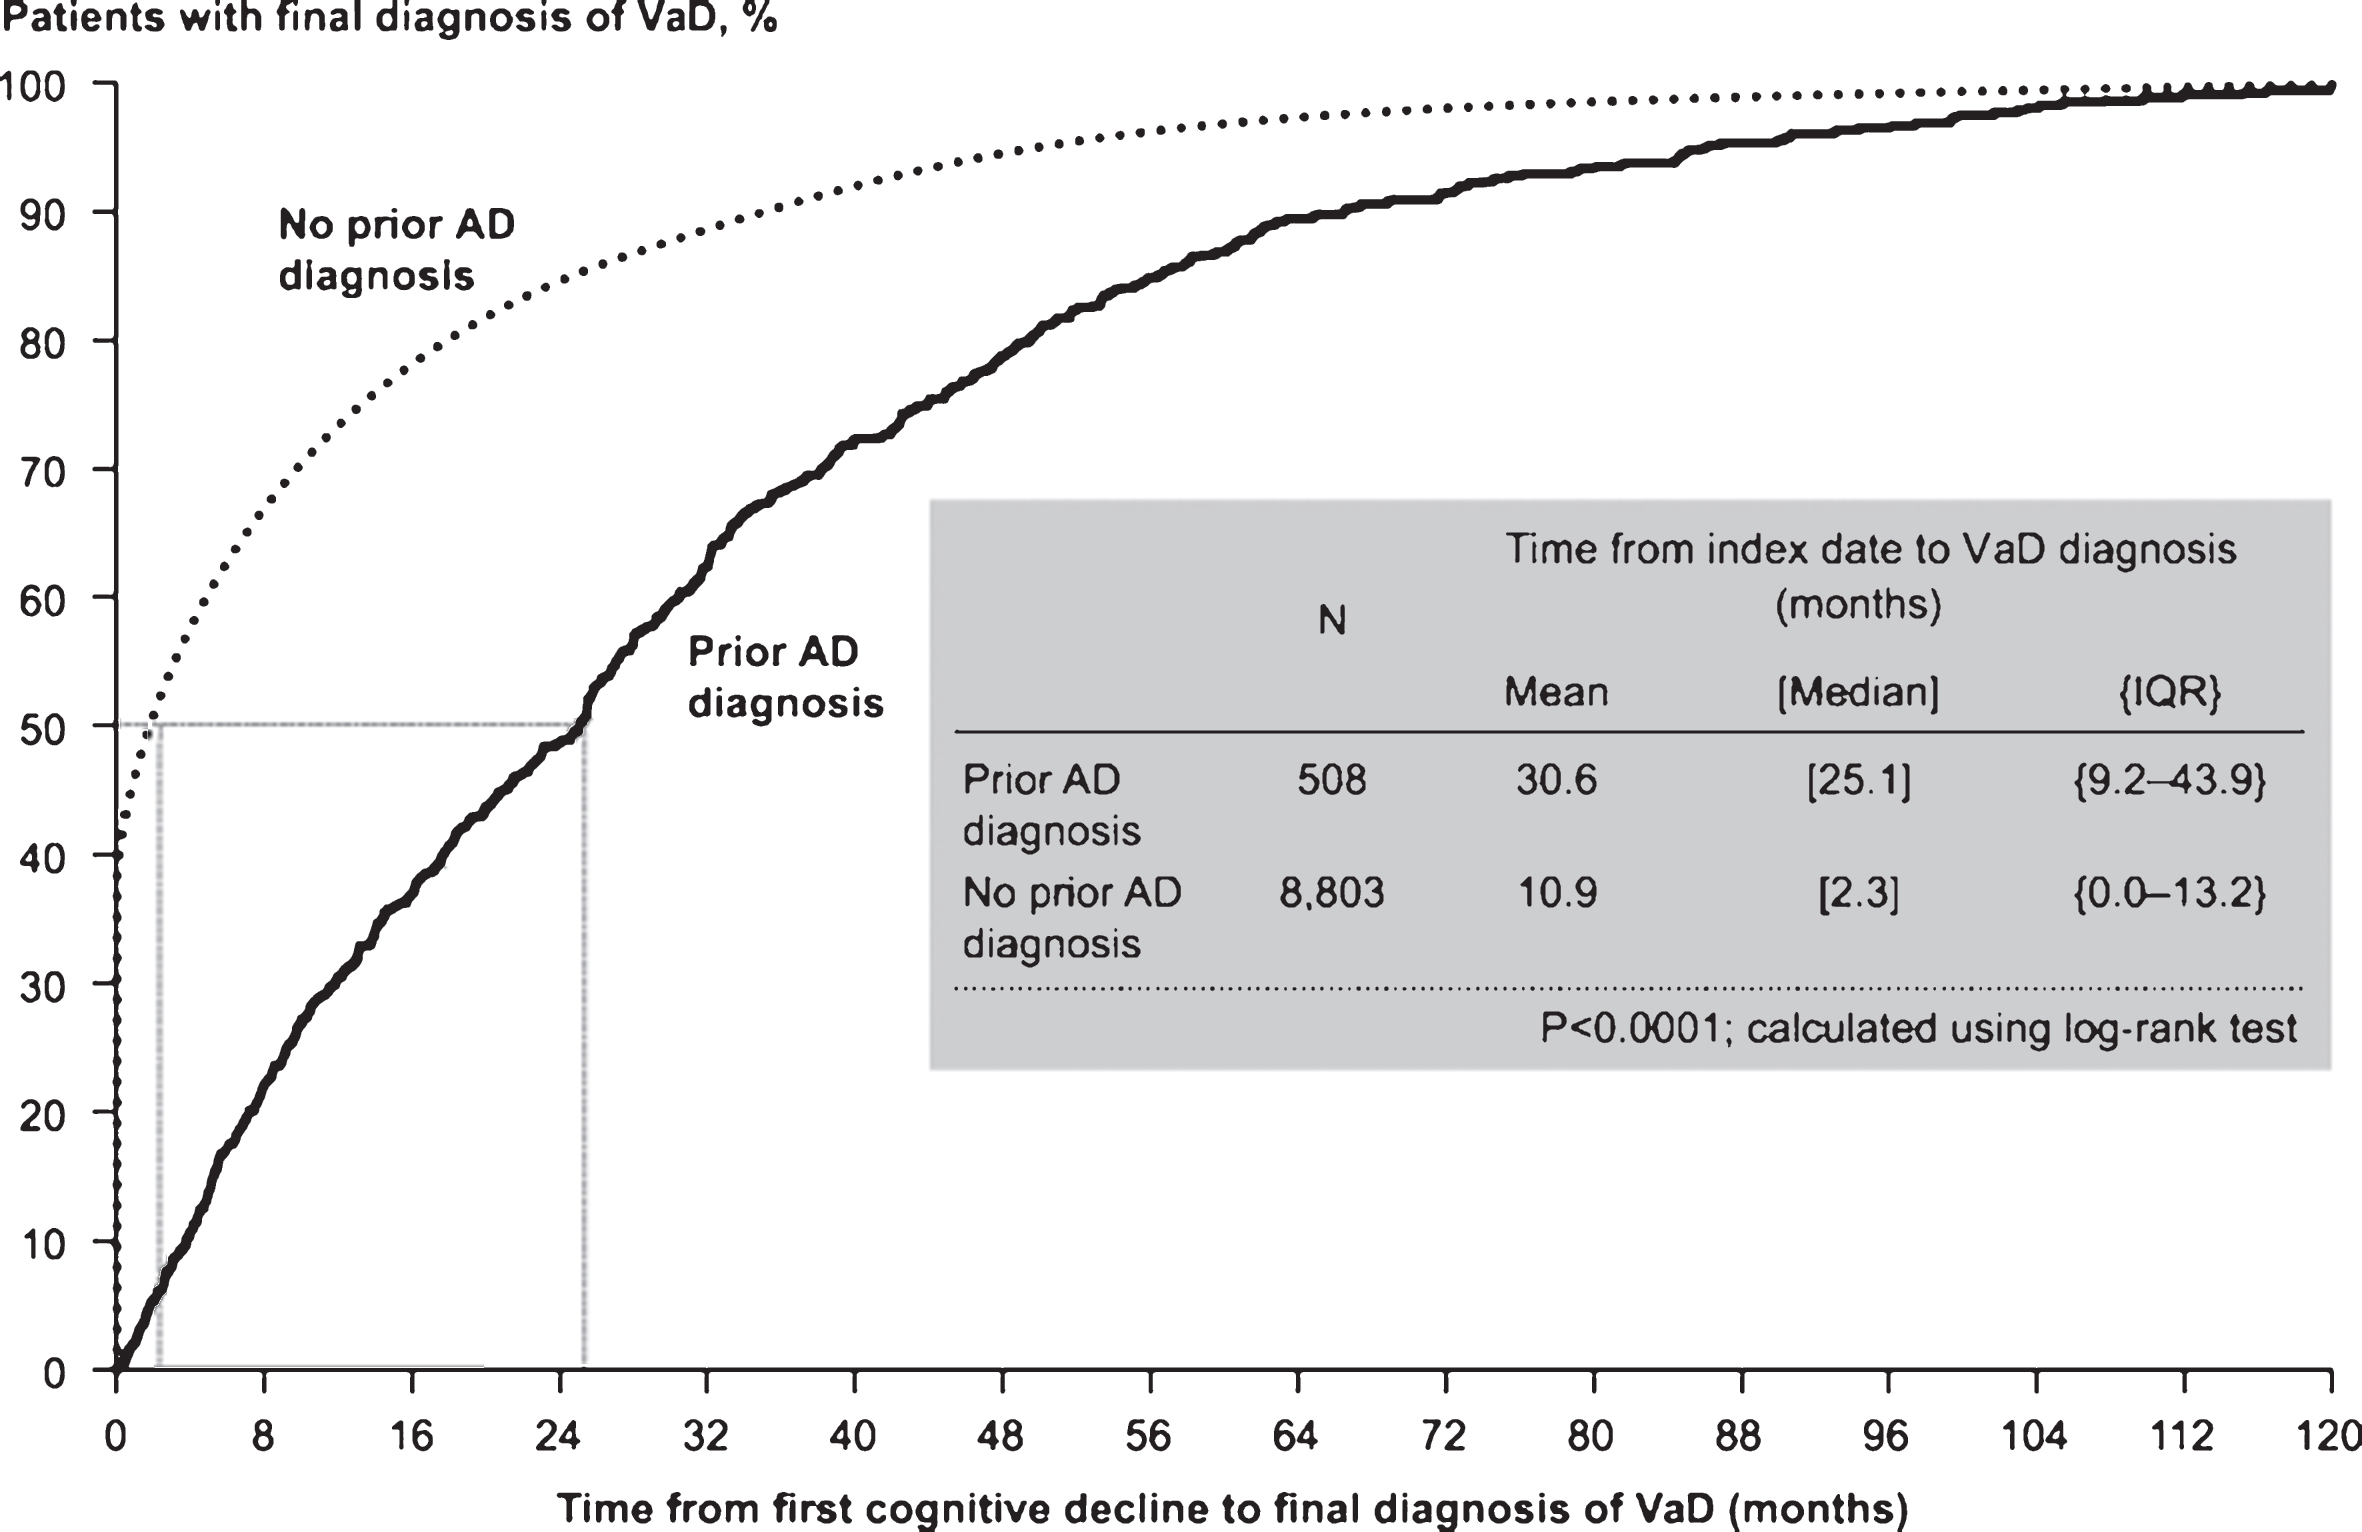 Time to vascular dementia (VaD) diagnosis in patients with and without prior Alzheimer’s disease (AD) diagnosis prior to propensity score matching. IQR, interquartile range.